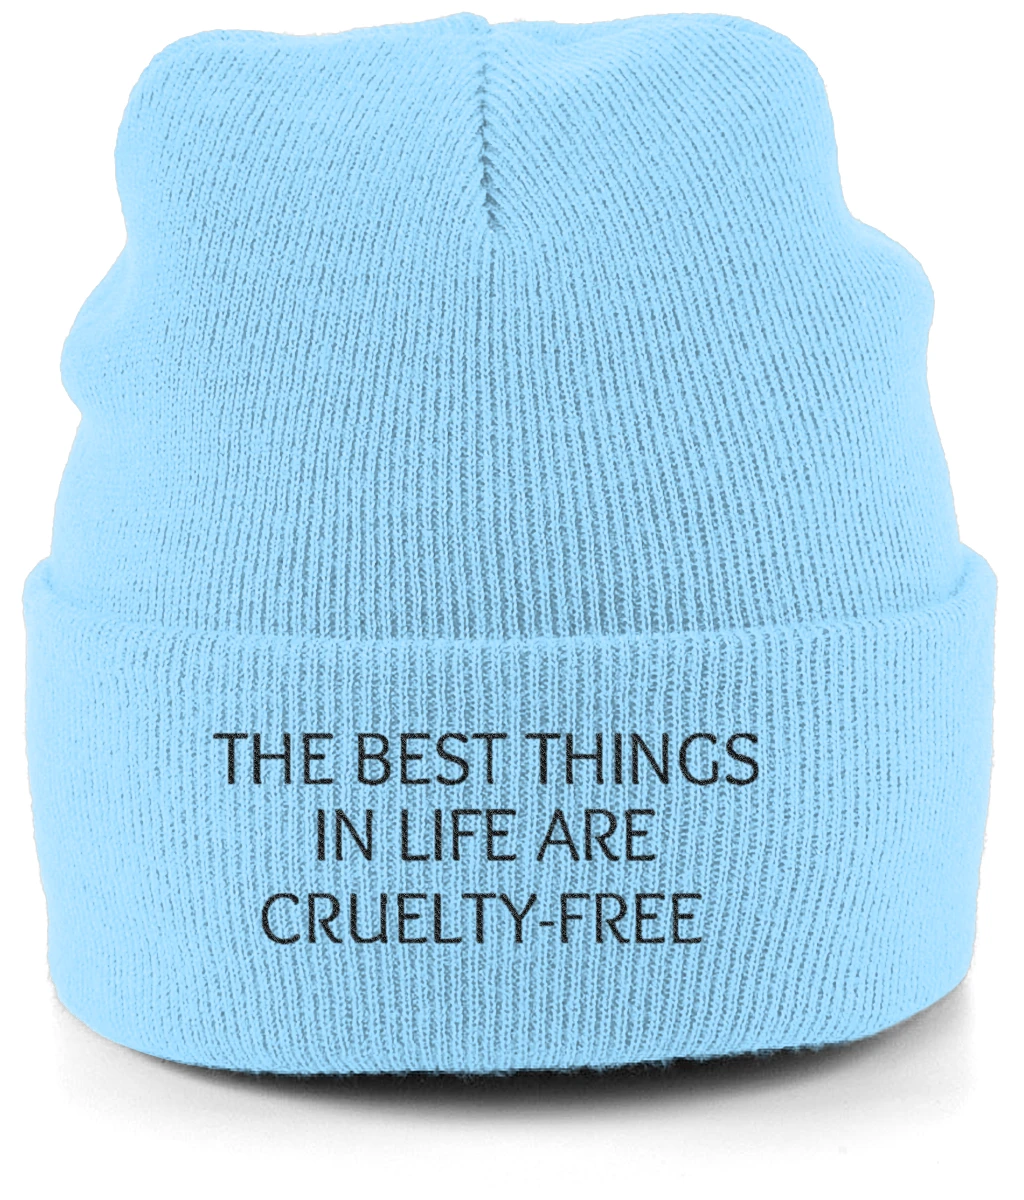 Beanie Unisex The Best Things In Life Are Cruelty-Free - Sky 1